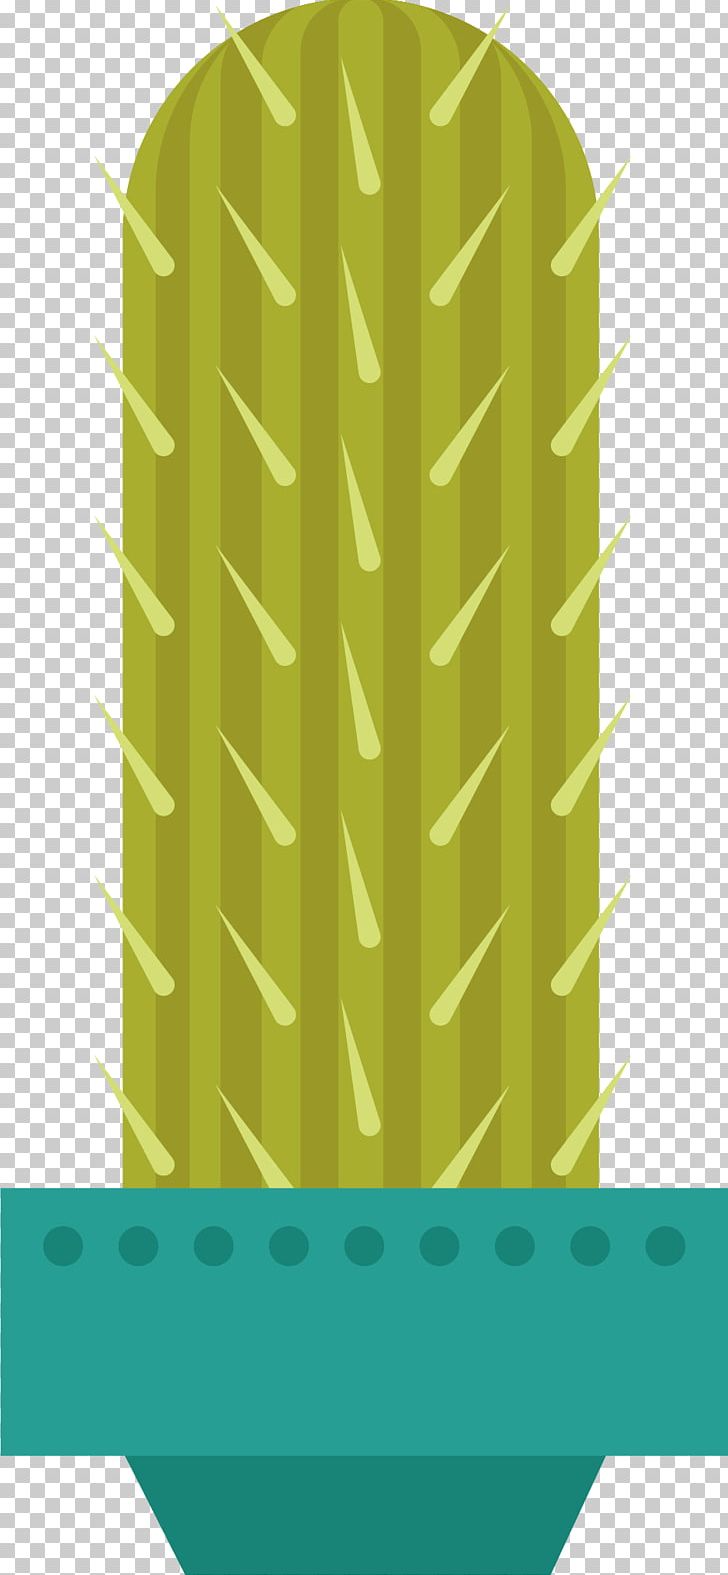 Cactaceae Euclidean PNG, Clipart, Angle, Barbed, Botany, Cactus Cartoon, Cactus Flower Free PNG Download